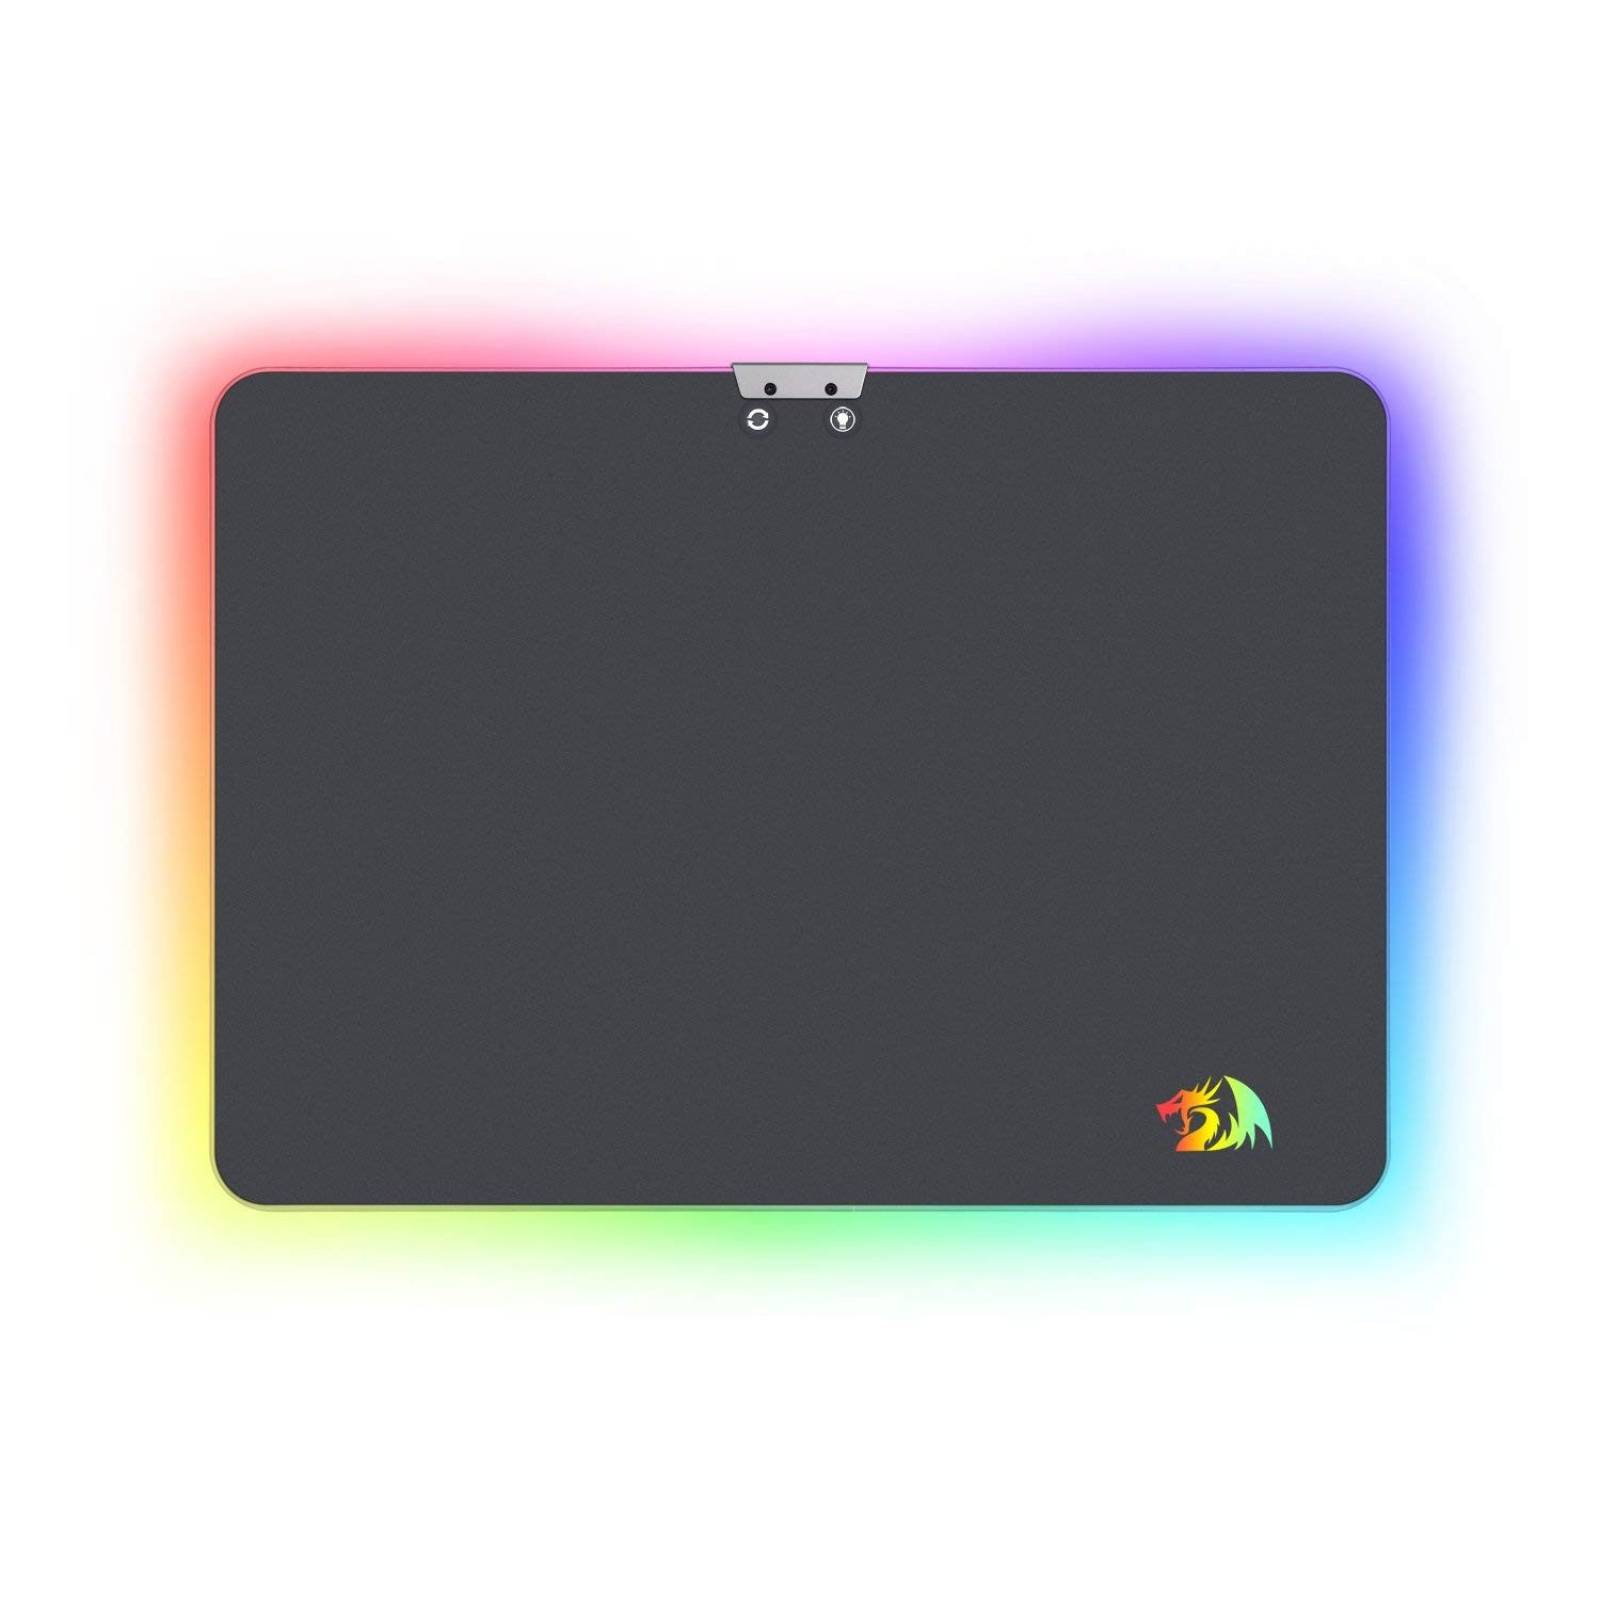 Mouse Pad Redragon P010 Aurora Gaming con Cable RGB LED